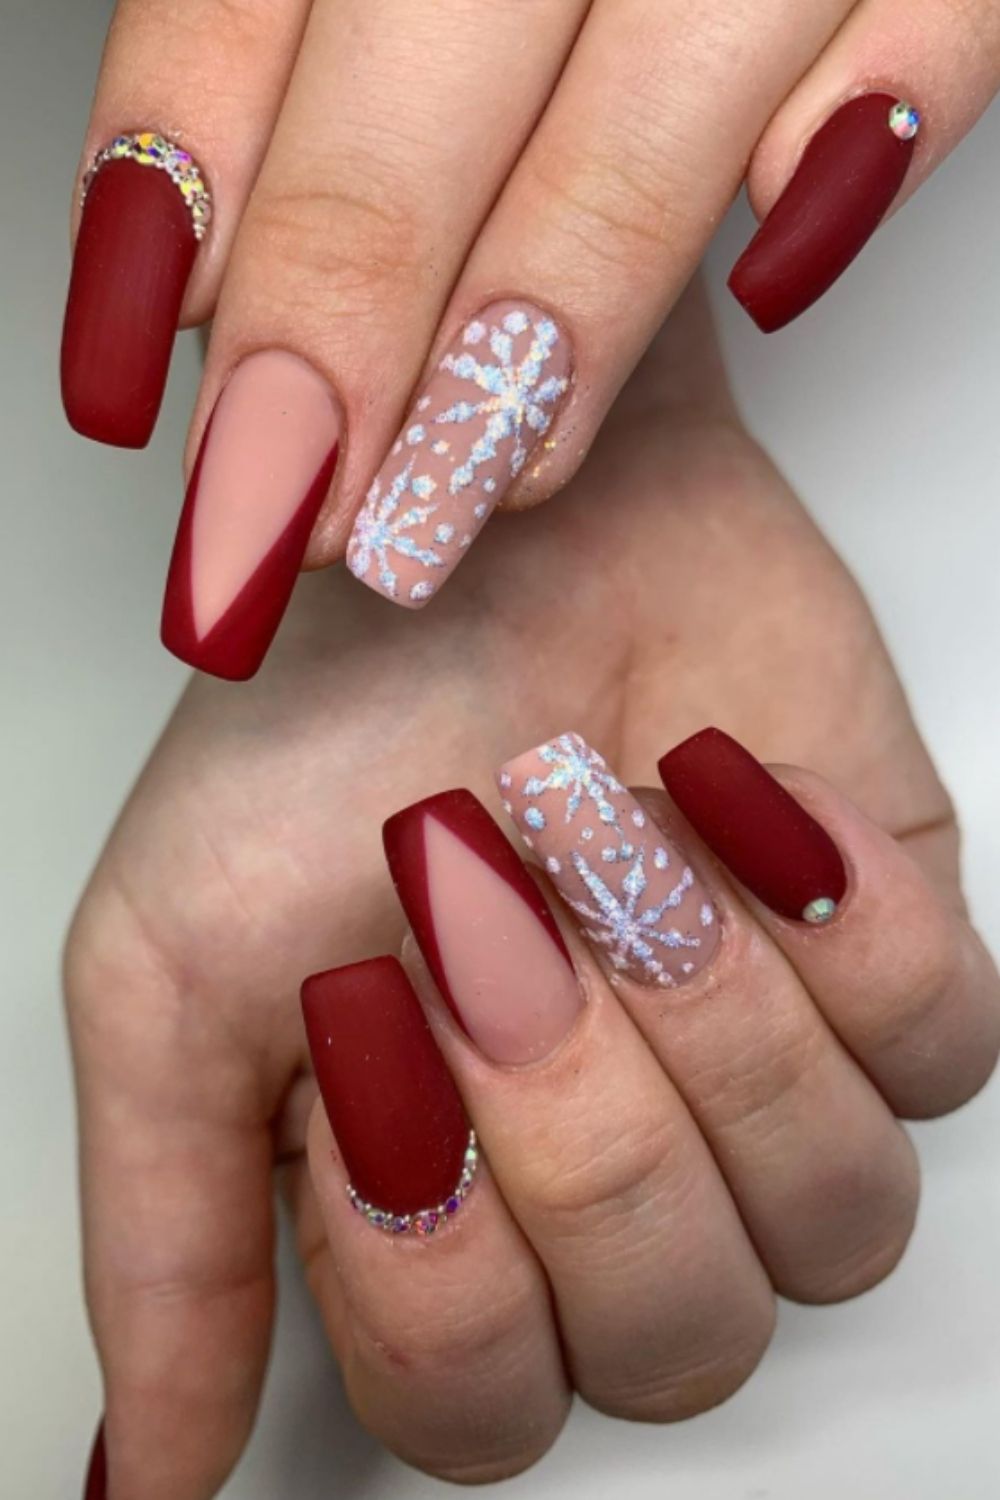 Red tip long nails